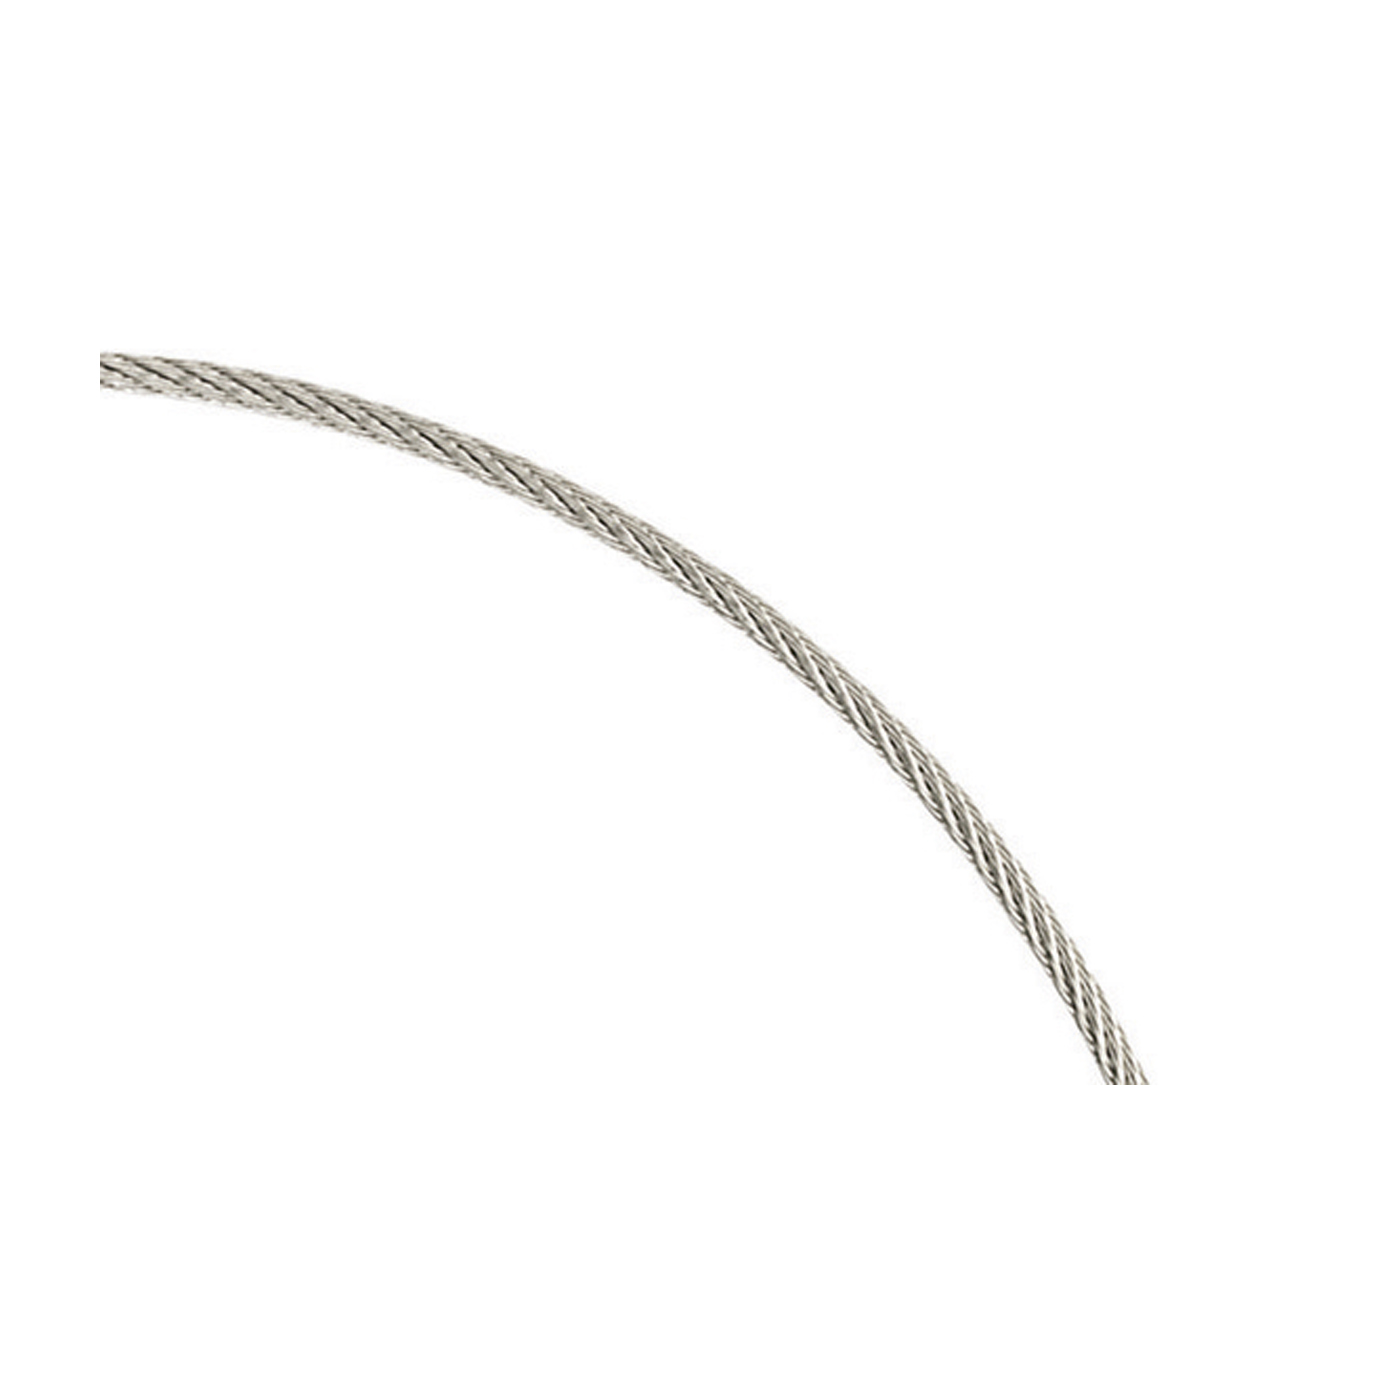 Steel Cable Neck Wire, ø 0.54 mm, 42 cm - 1 piece